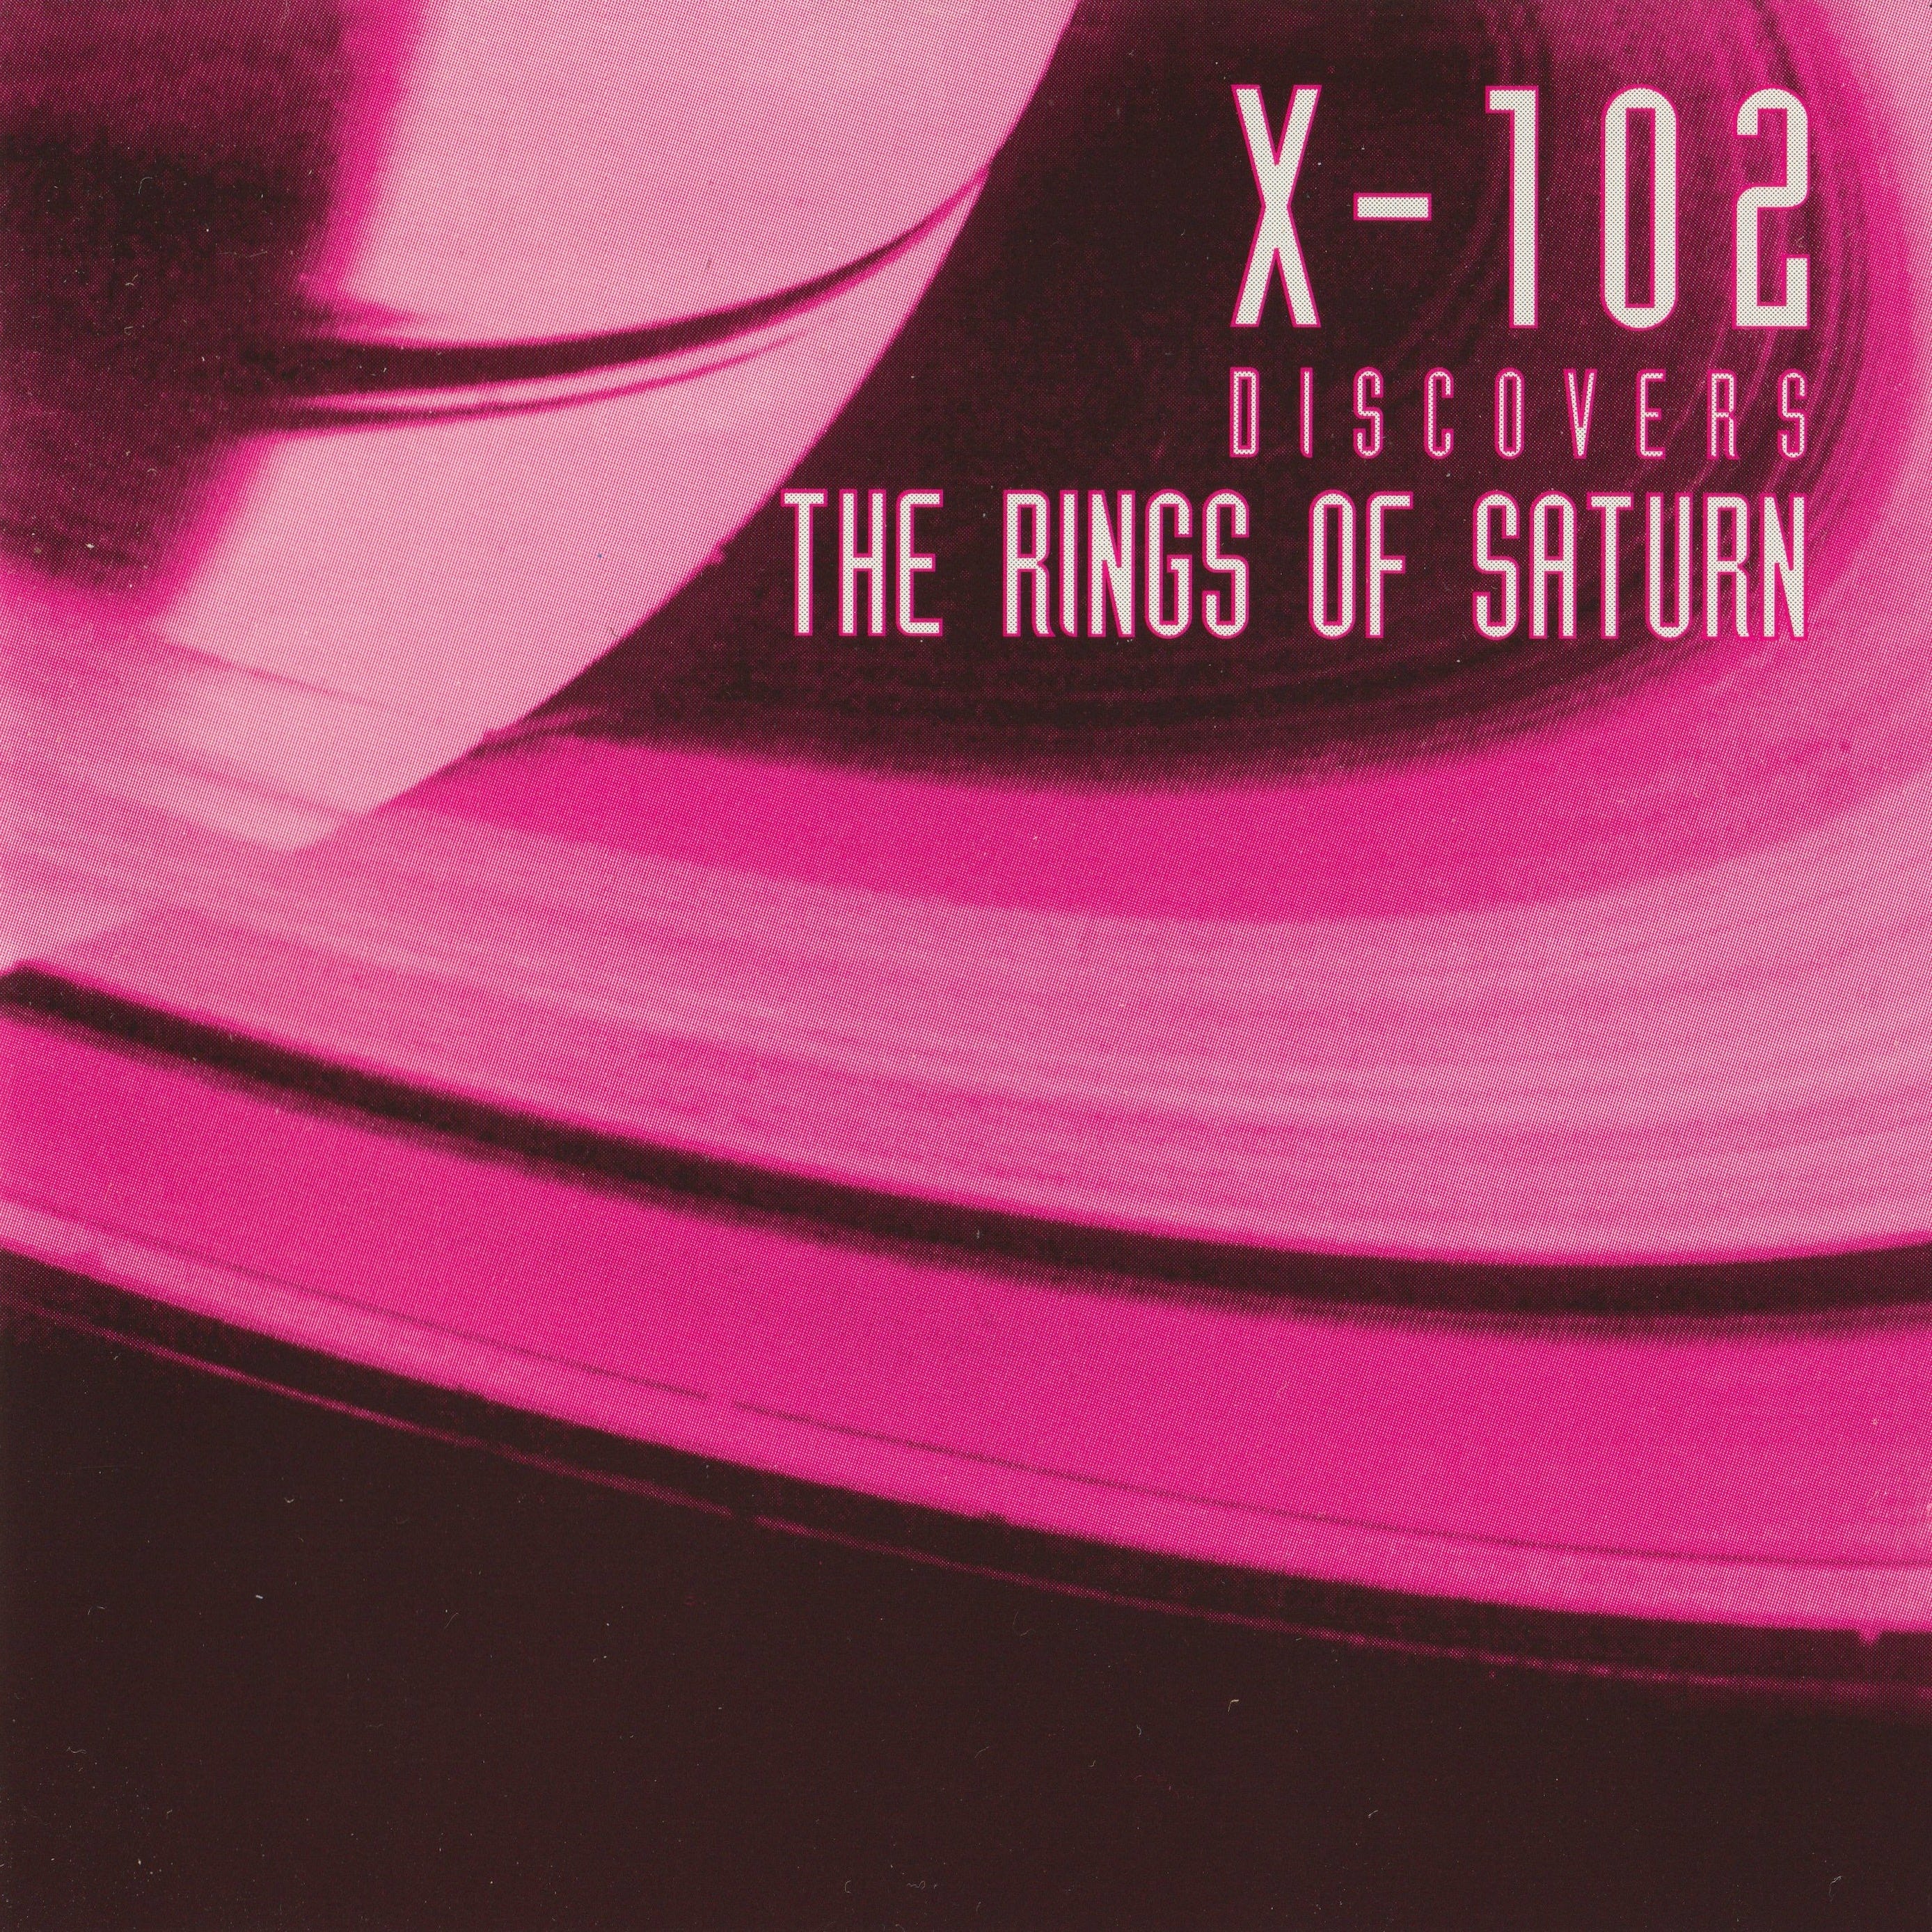 bagage Ounce Afgeschaft X-102 – 'Discovers the Rings of Saturn' - by T.Q. Kelley